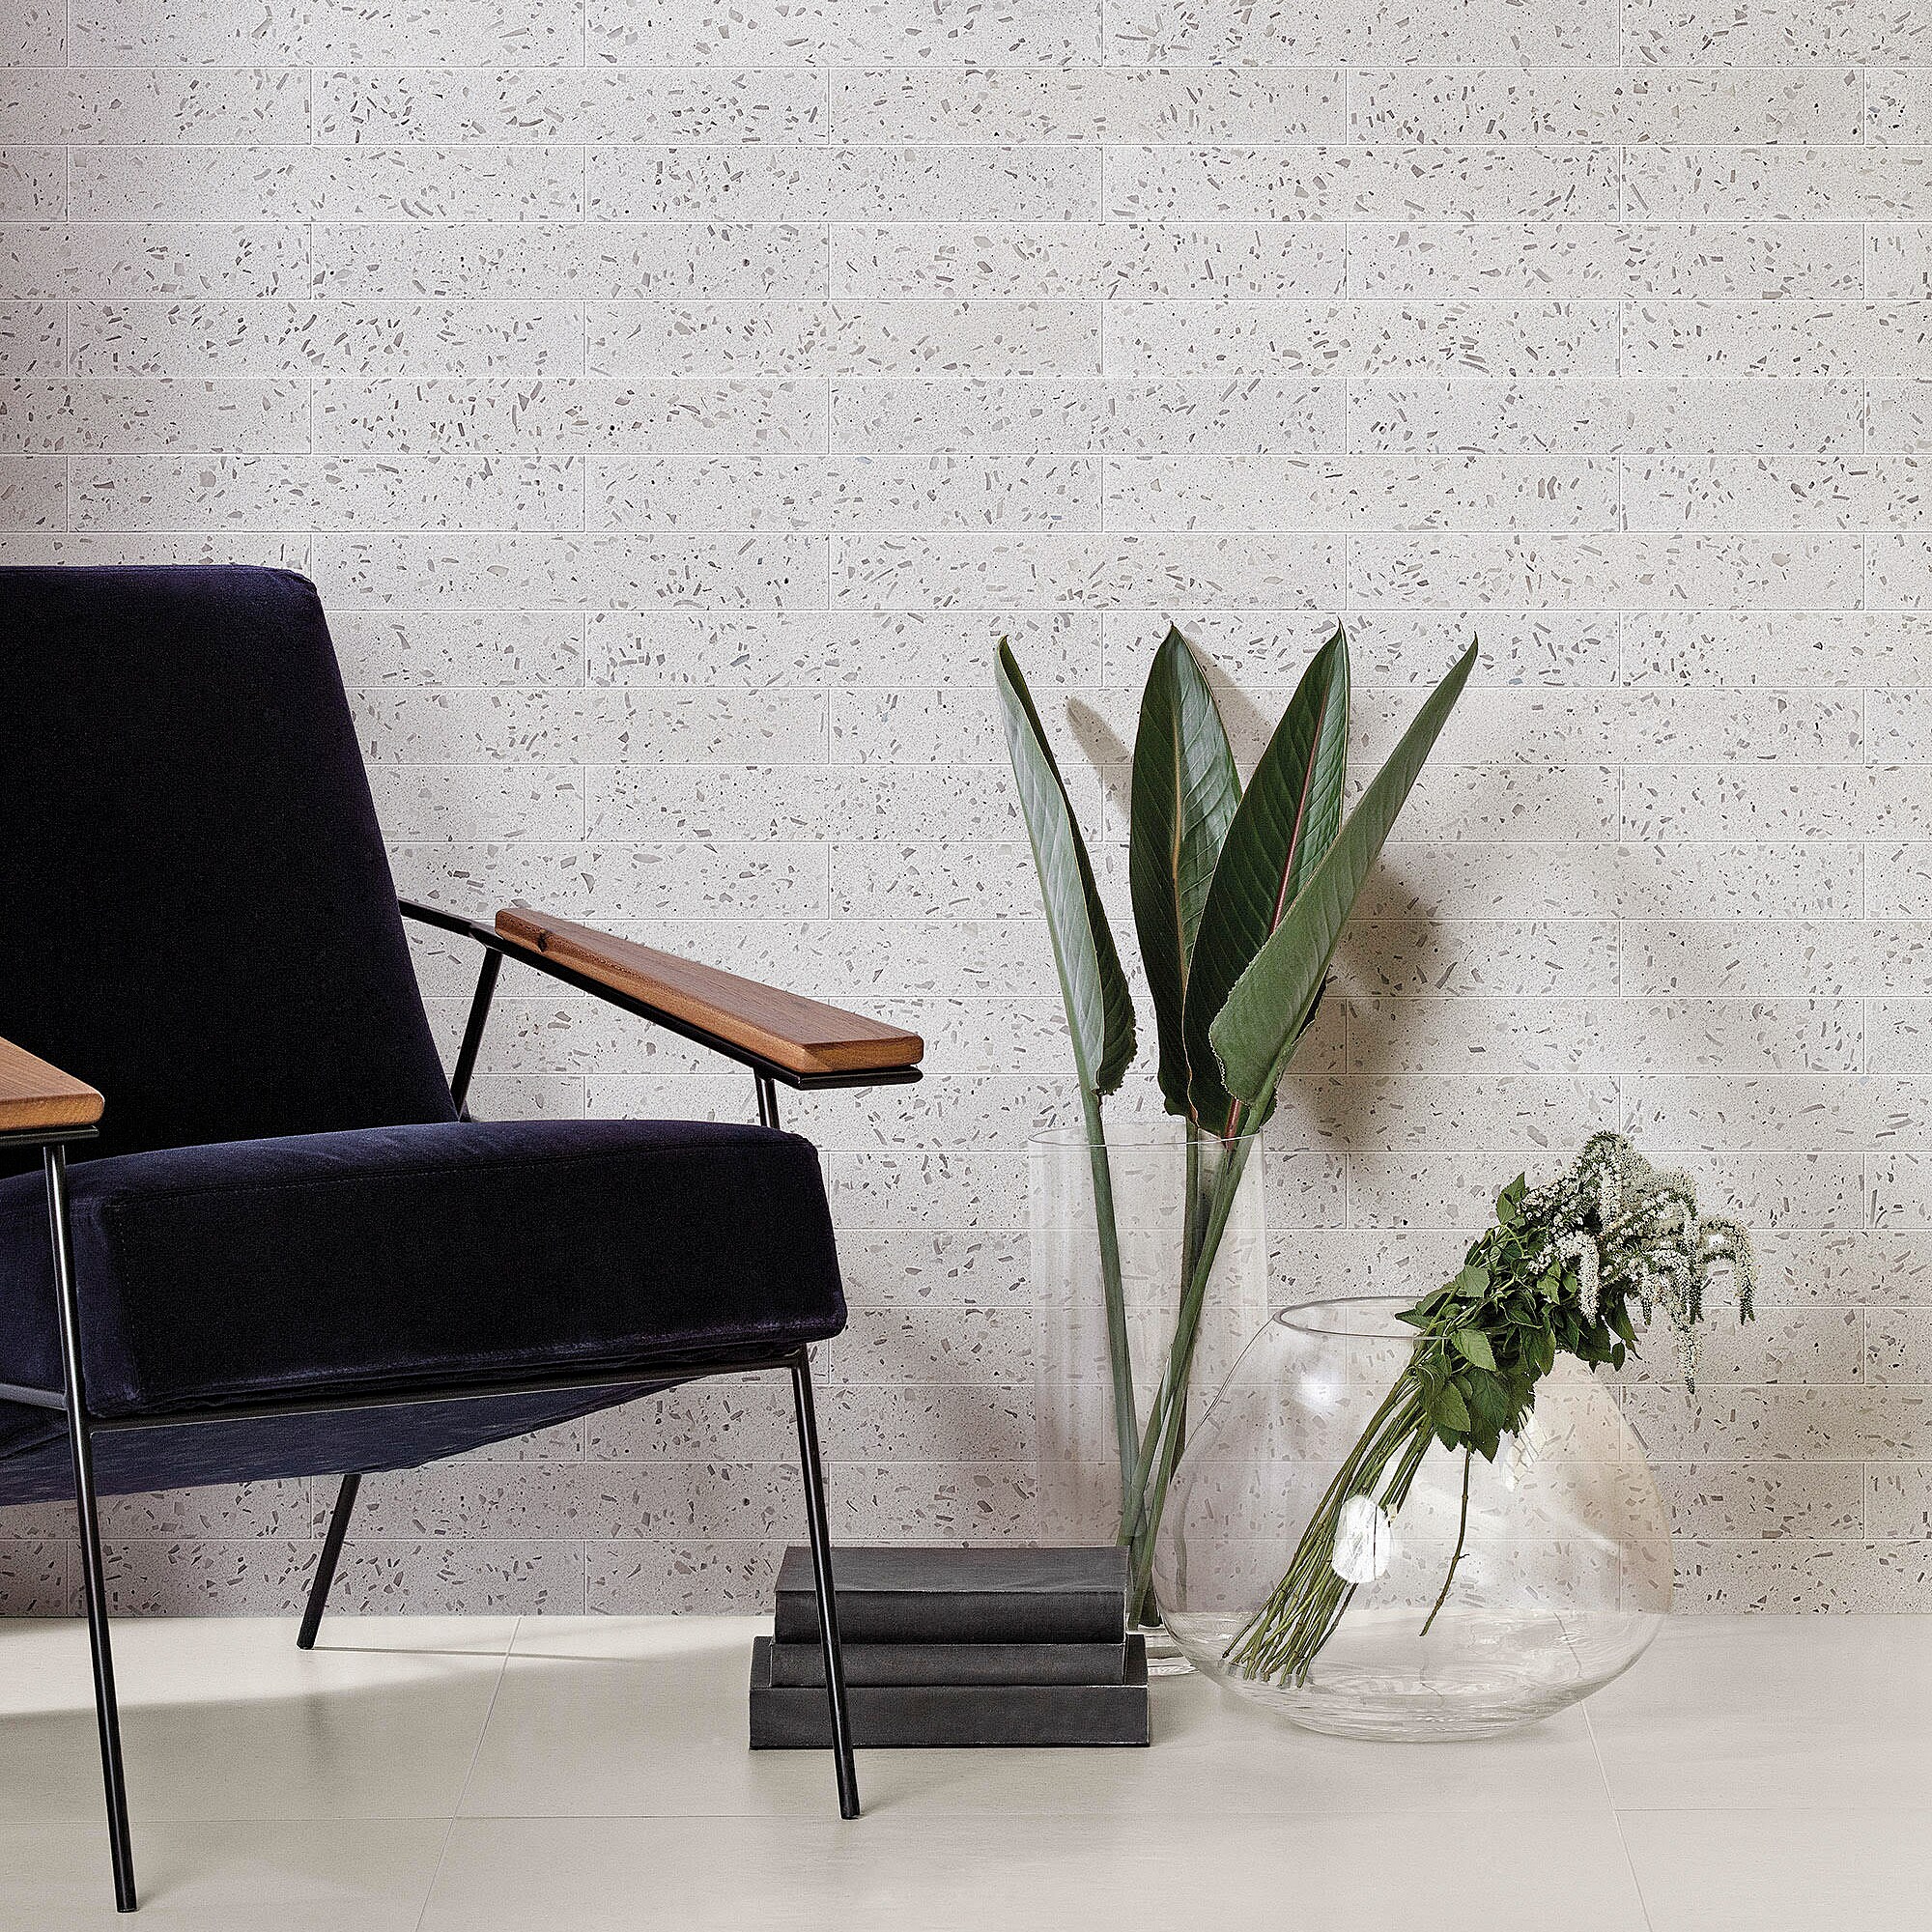 Artmore Tile Stone ft/ Slate Wall Terrazzo 3-in Tile Lunar Gray department Look Carton) in Stone at the 16-in Matte Brick x (5.38-sq. Tile Natural